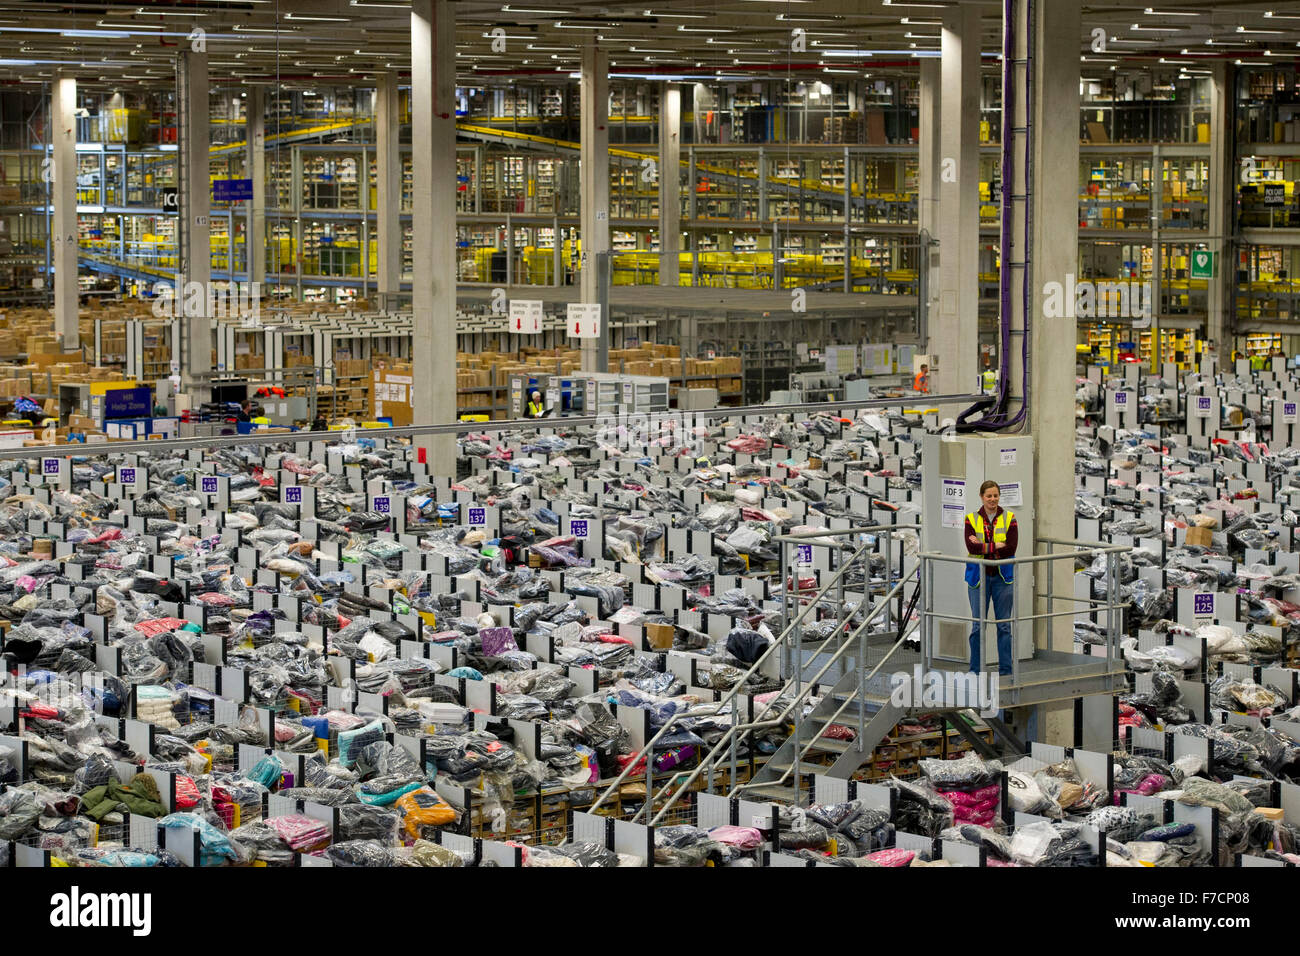 The Amazon warehouse fulfillment centre in Swansea, South Wales. Amazon have hired an number of extra staff for Christmas. Stock Photo